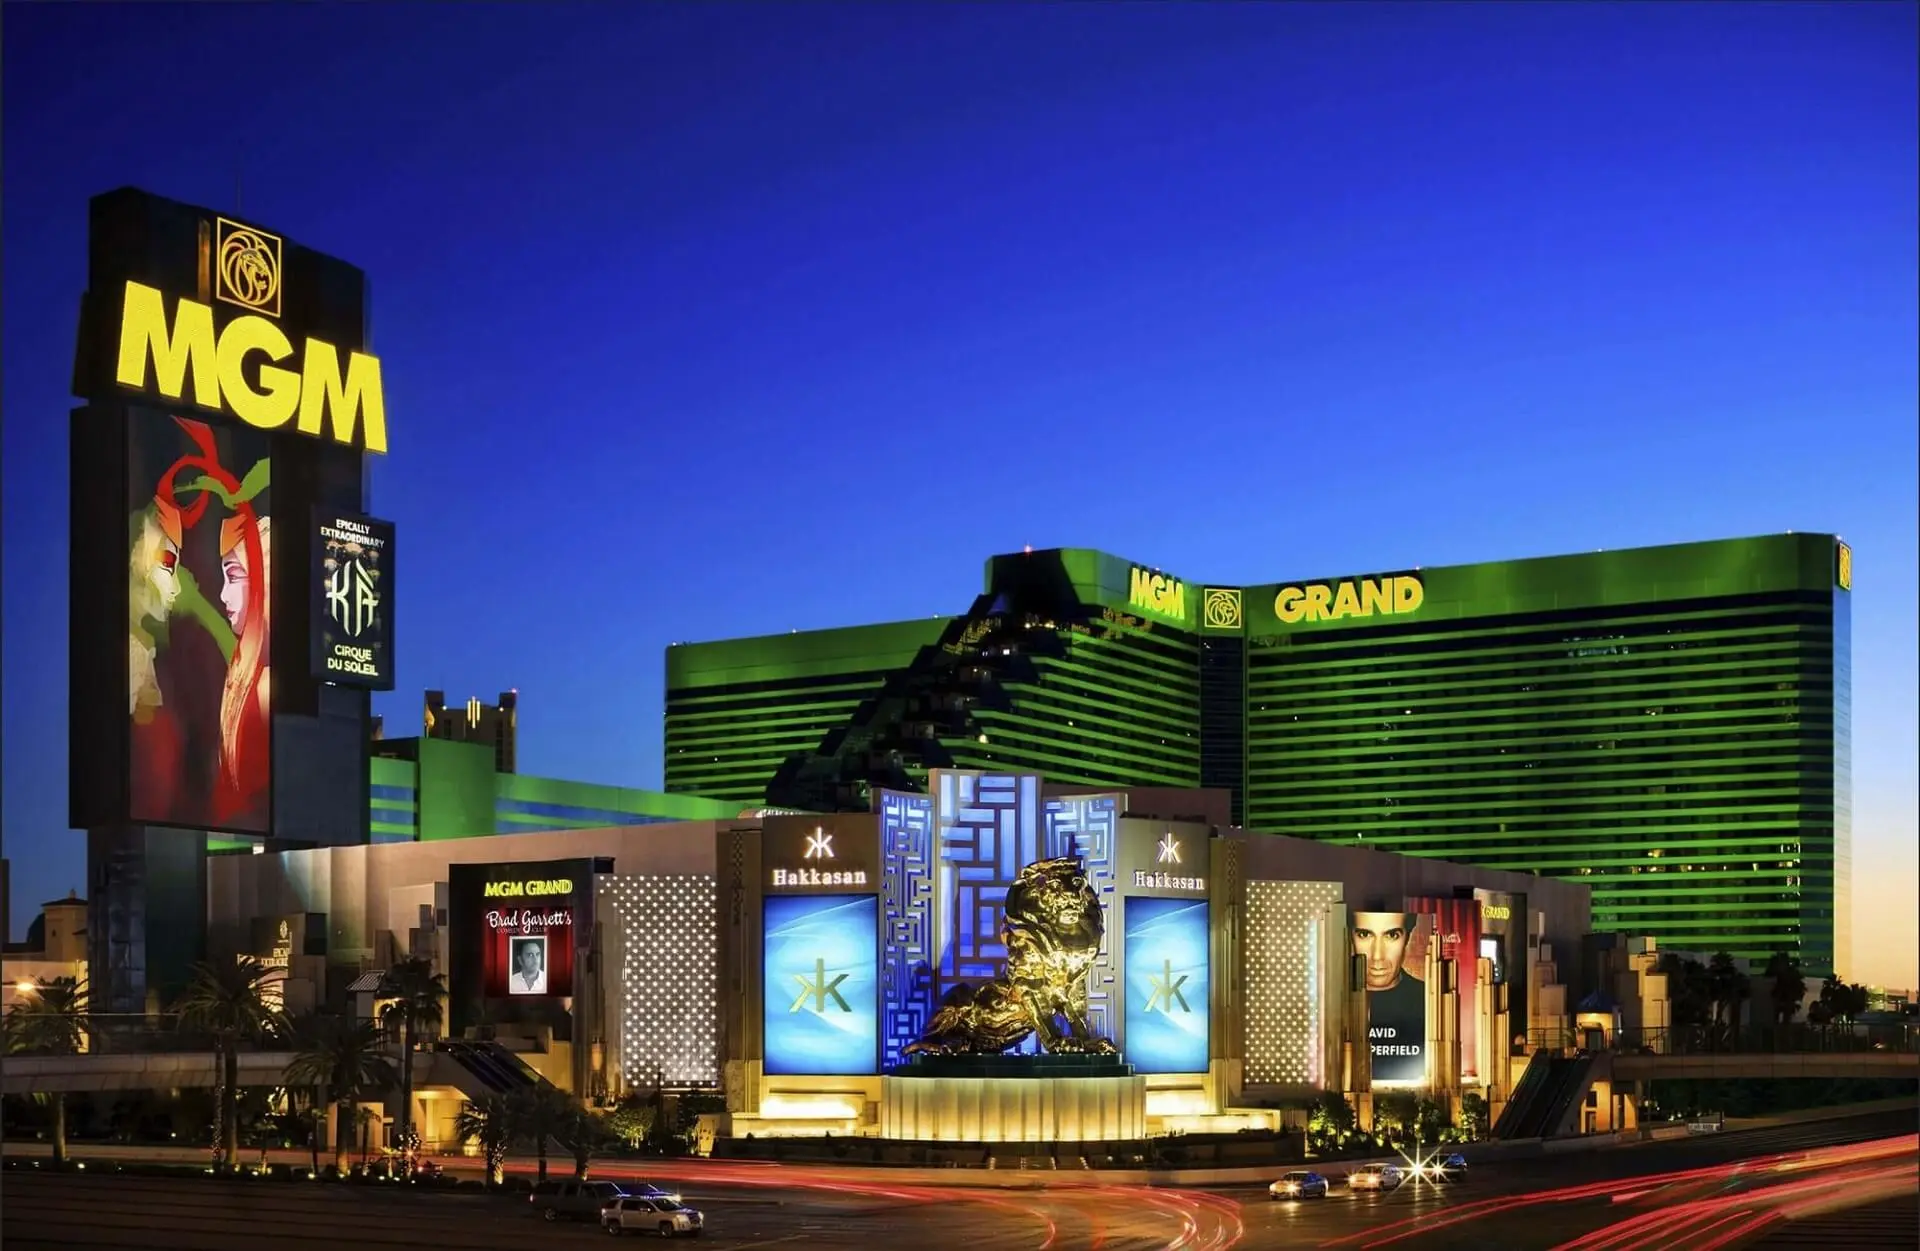 Image of the emerald colored MGM Grand casino and hotel on the Las Vegas strip